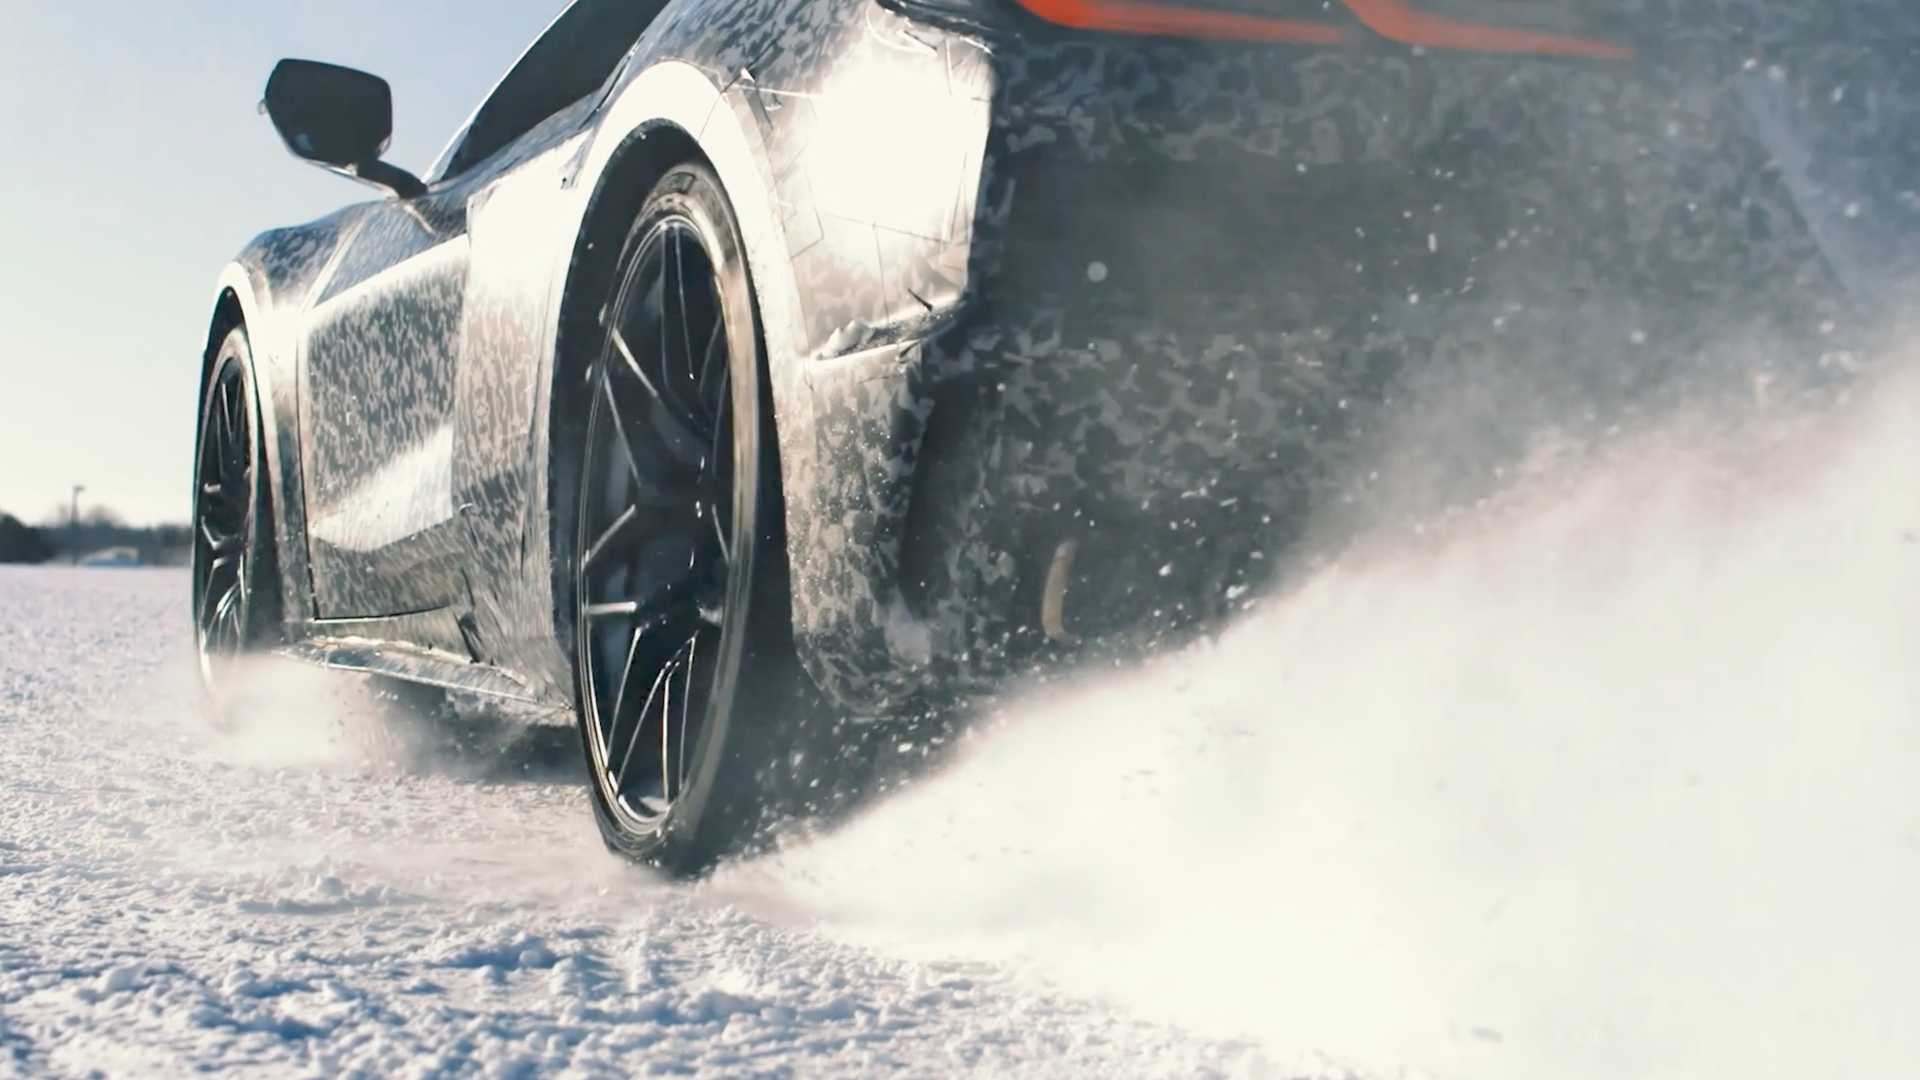 A sports car accelerates in the snow